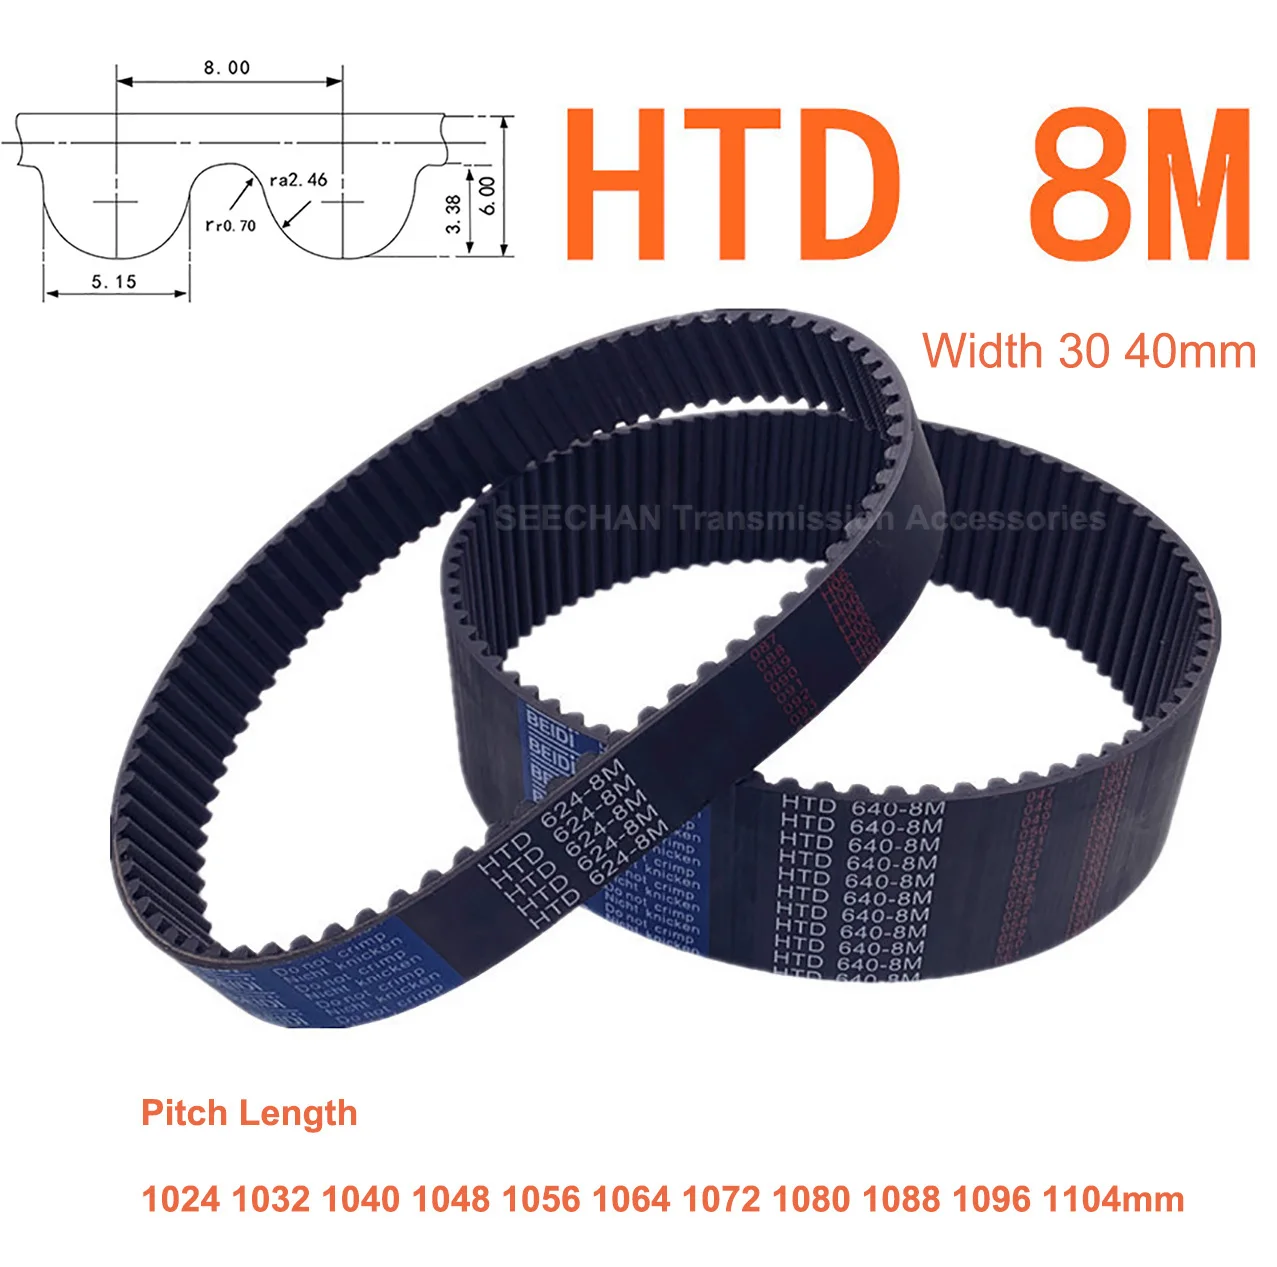 

HTD 8M Rubber Closed Synchronous Timing Belt Width 30 40mm Perimeter 1024 1032 1040 1048 1056 1064 1072 1080 1088 1096 1104mm